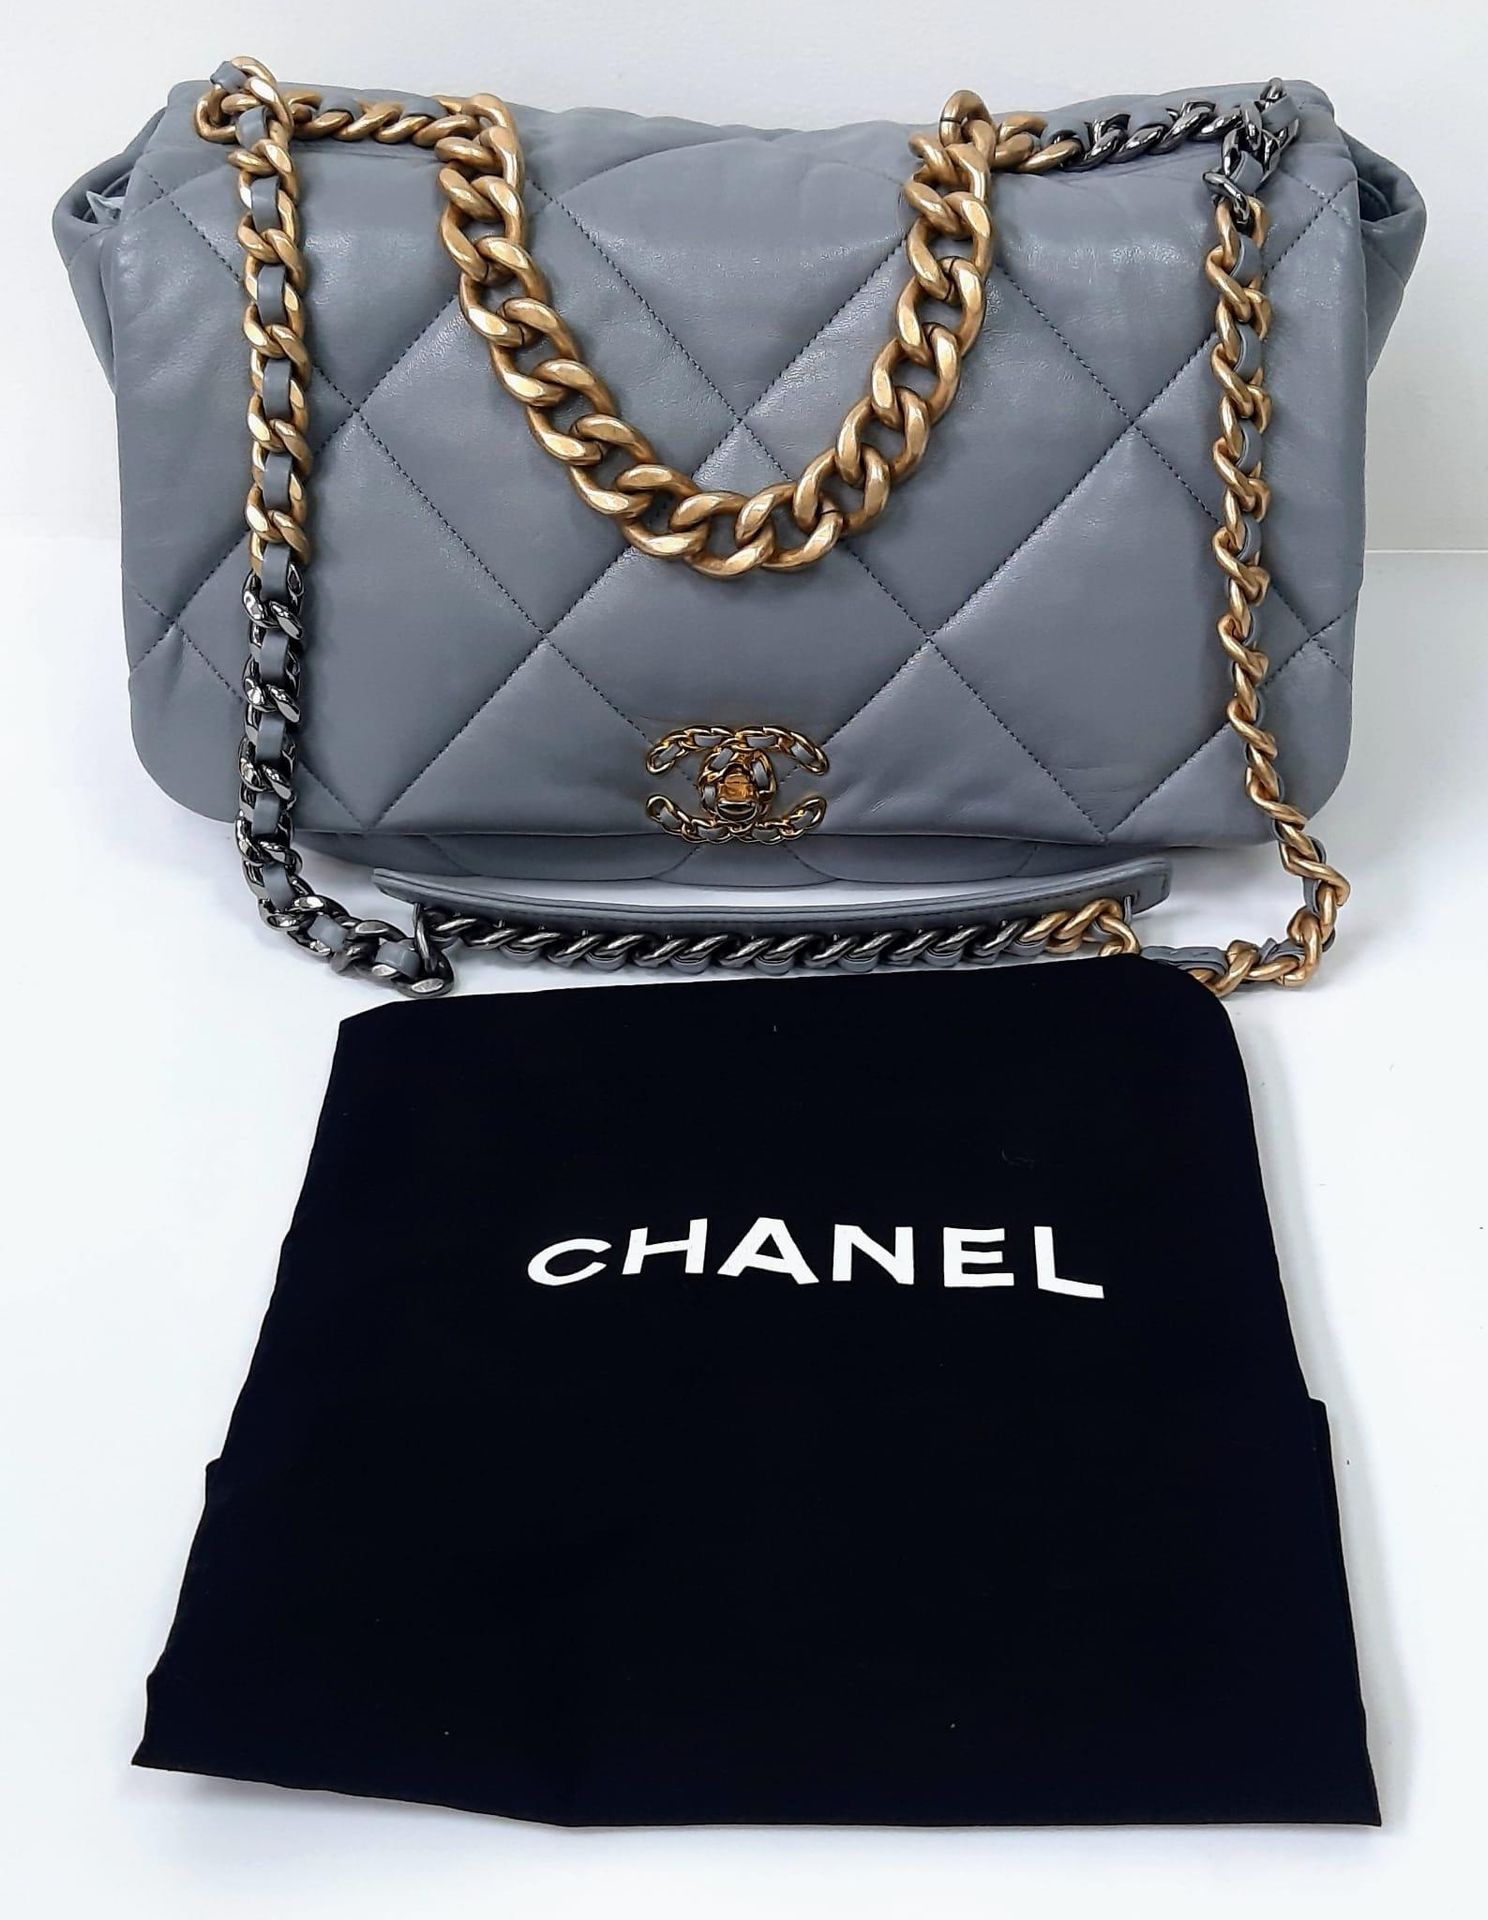 A Chanel 19 Maxi Grey Leather Flap Bag. Soft quilted lea…